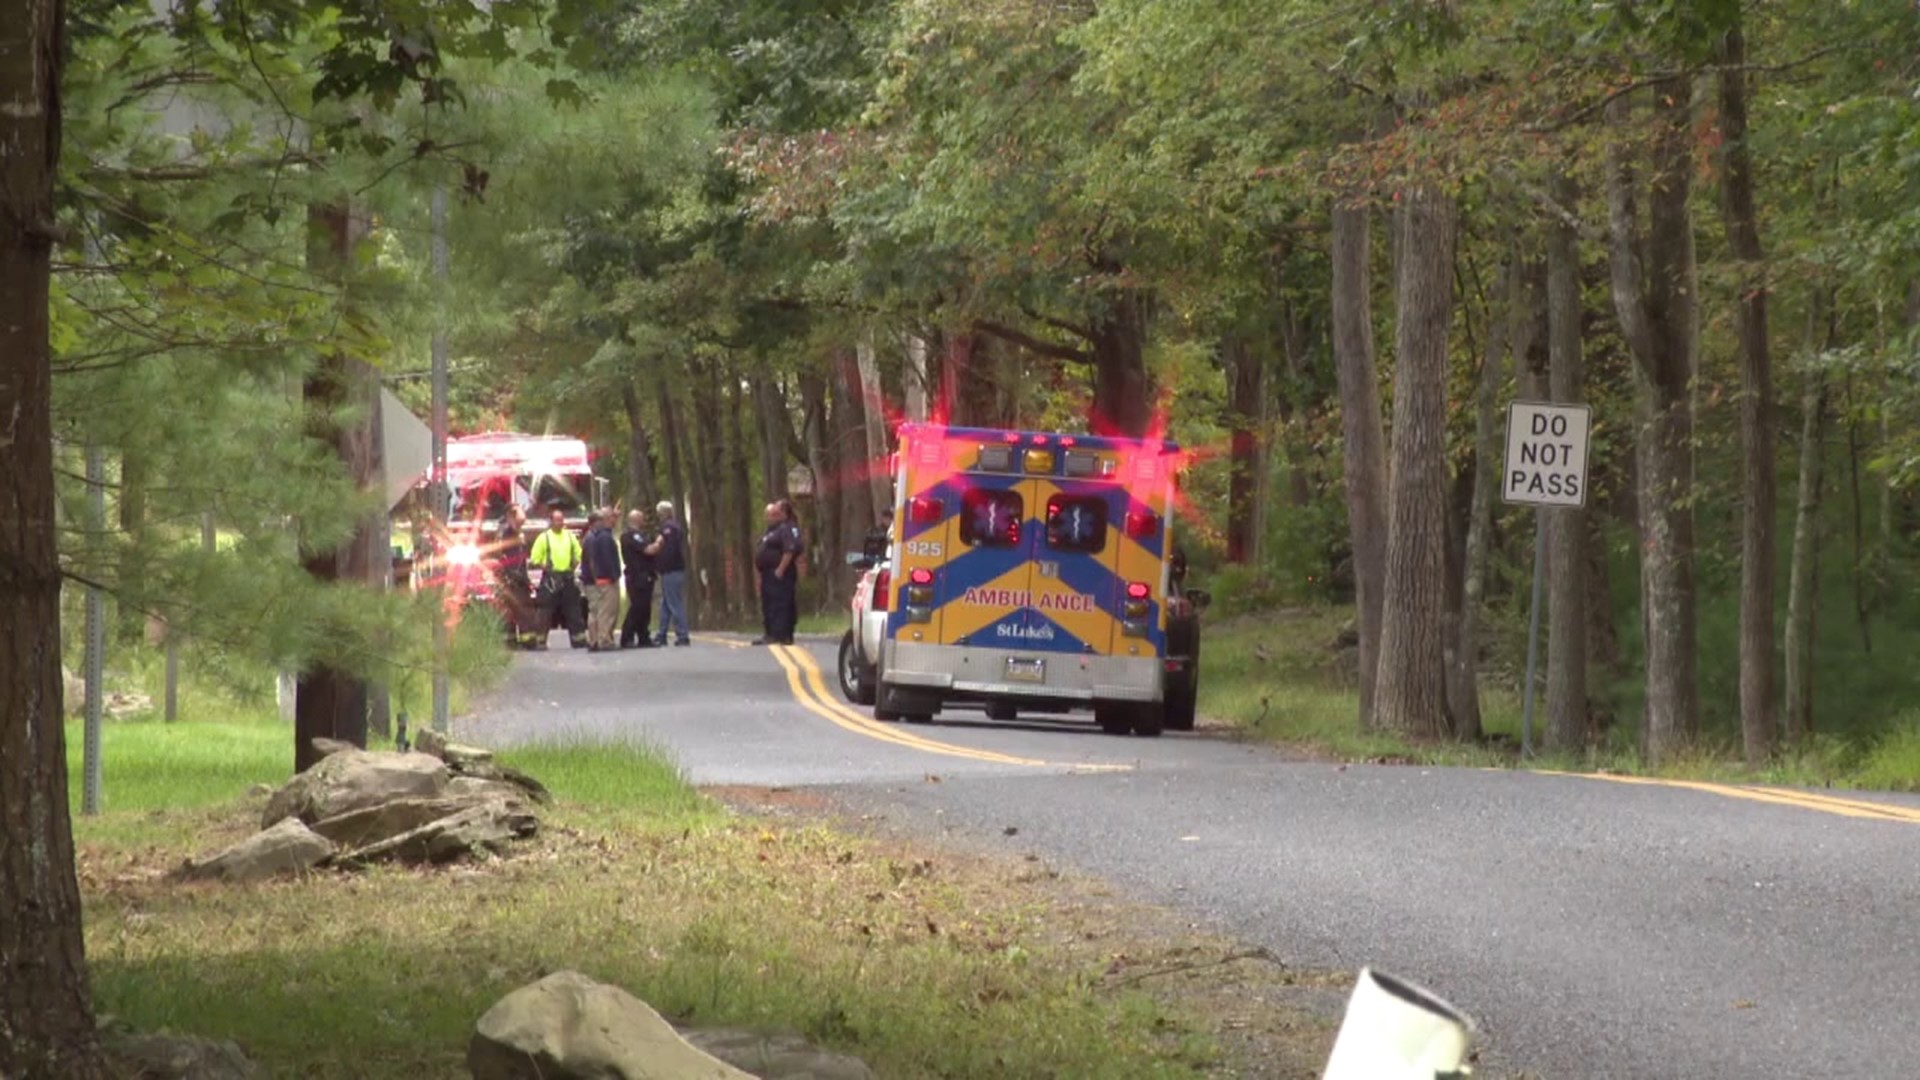 The crash happened just after 2 p.m. on Hallet Road in Pocono Township.